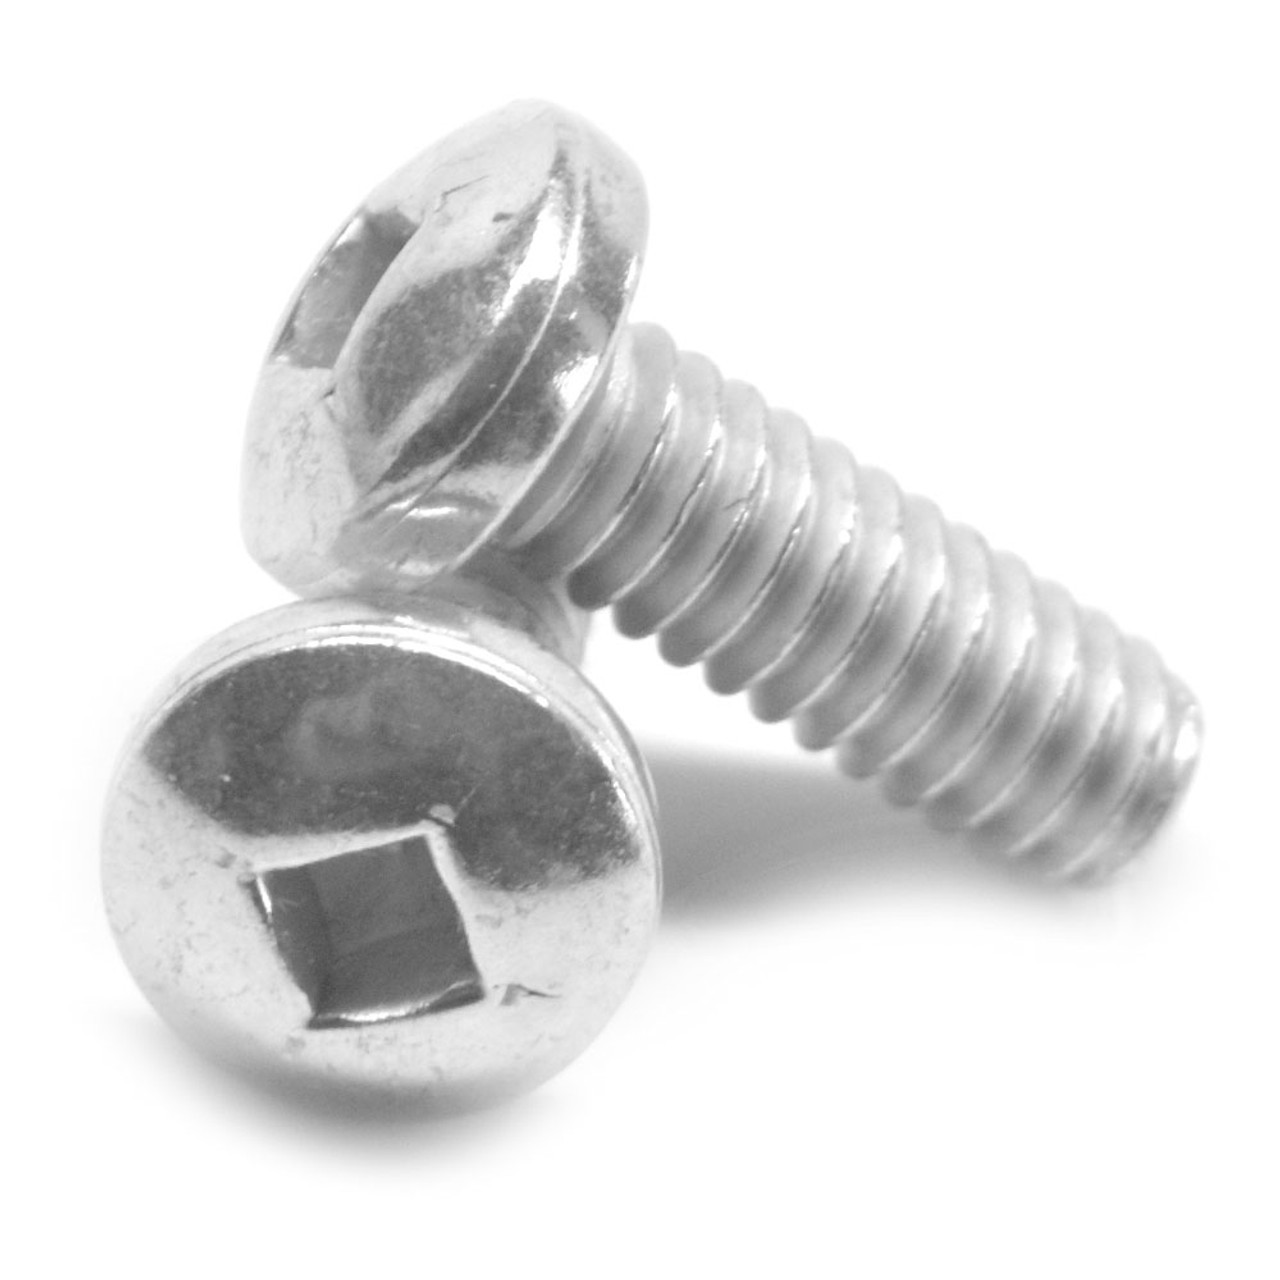 1/4"-20 x 2" (FT) Coarse Thread Machine Screw Square Drive Pan Head Stainless Steel 18-8